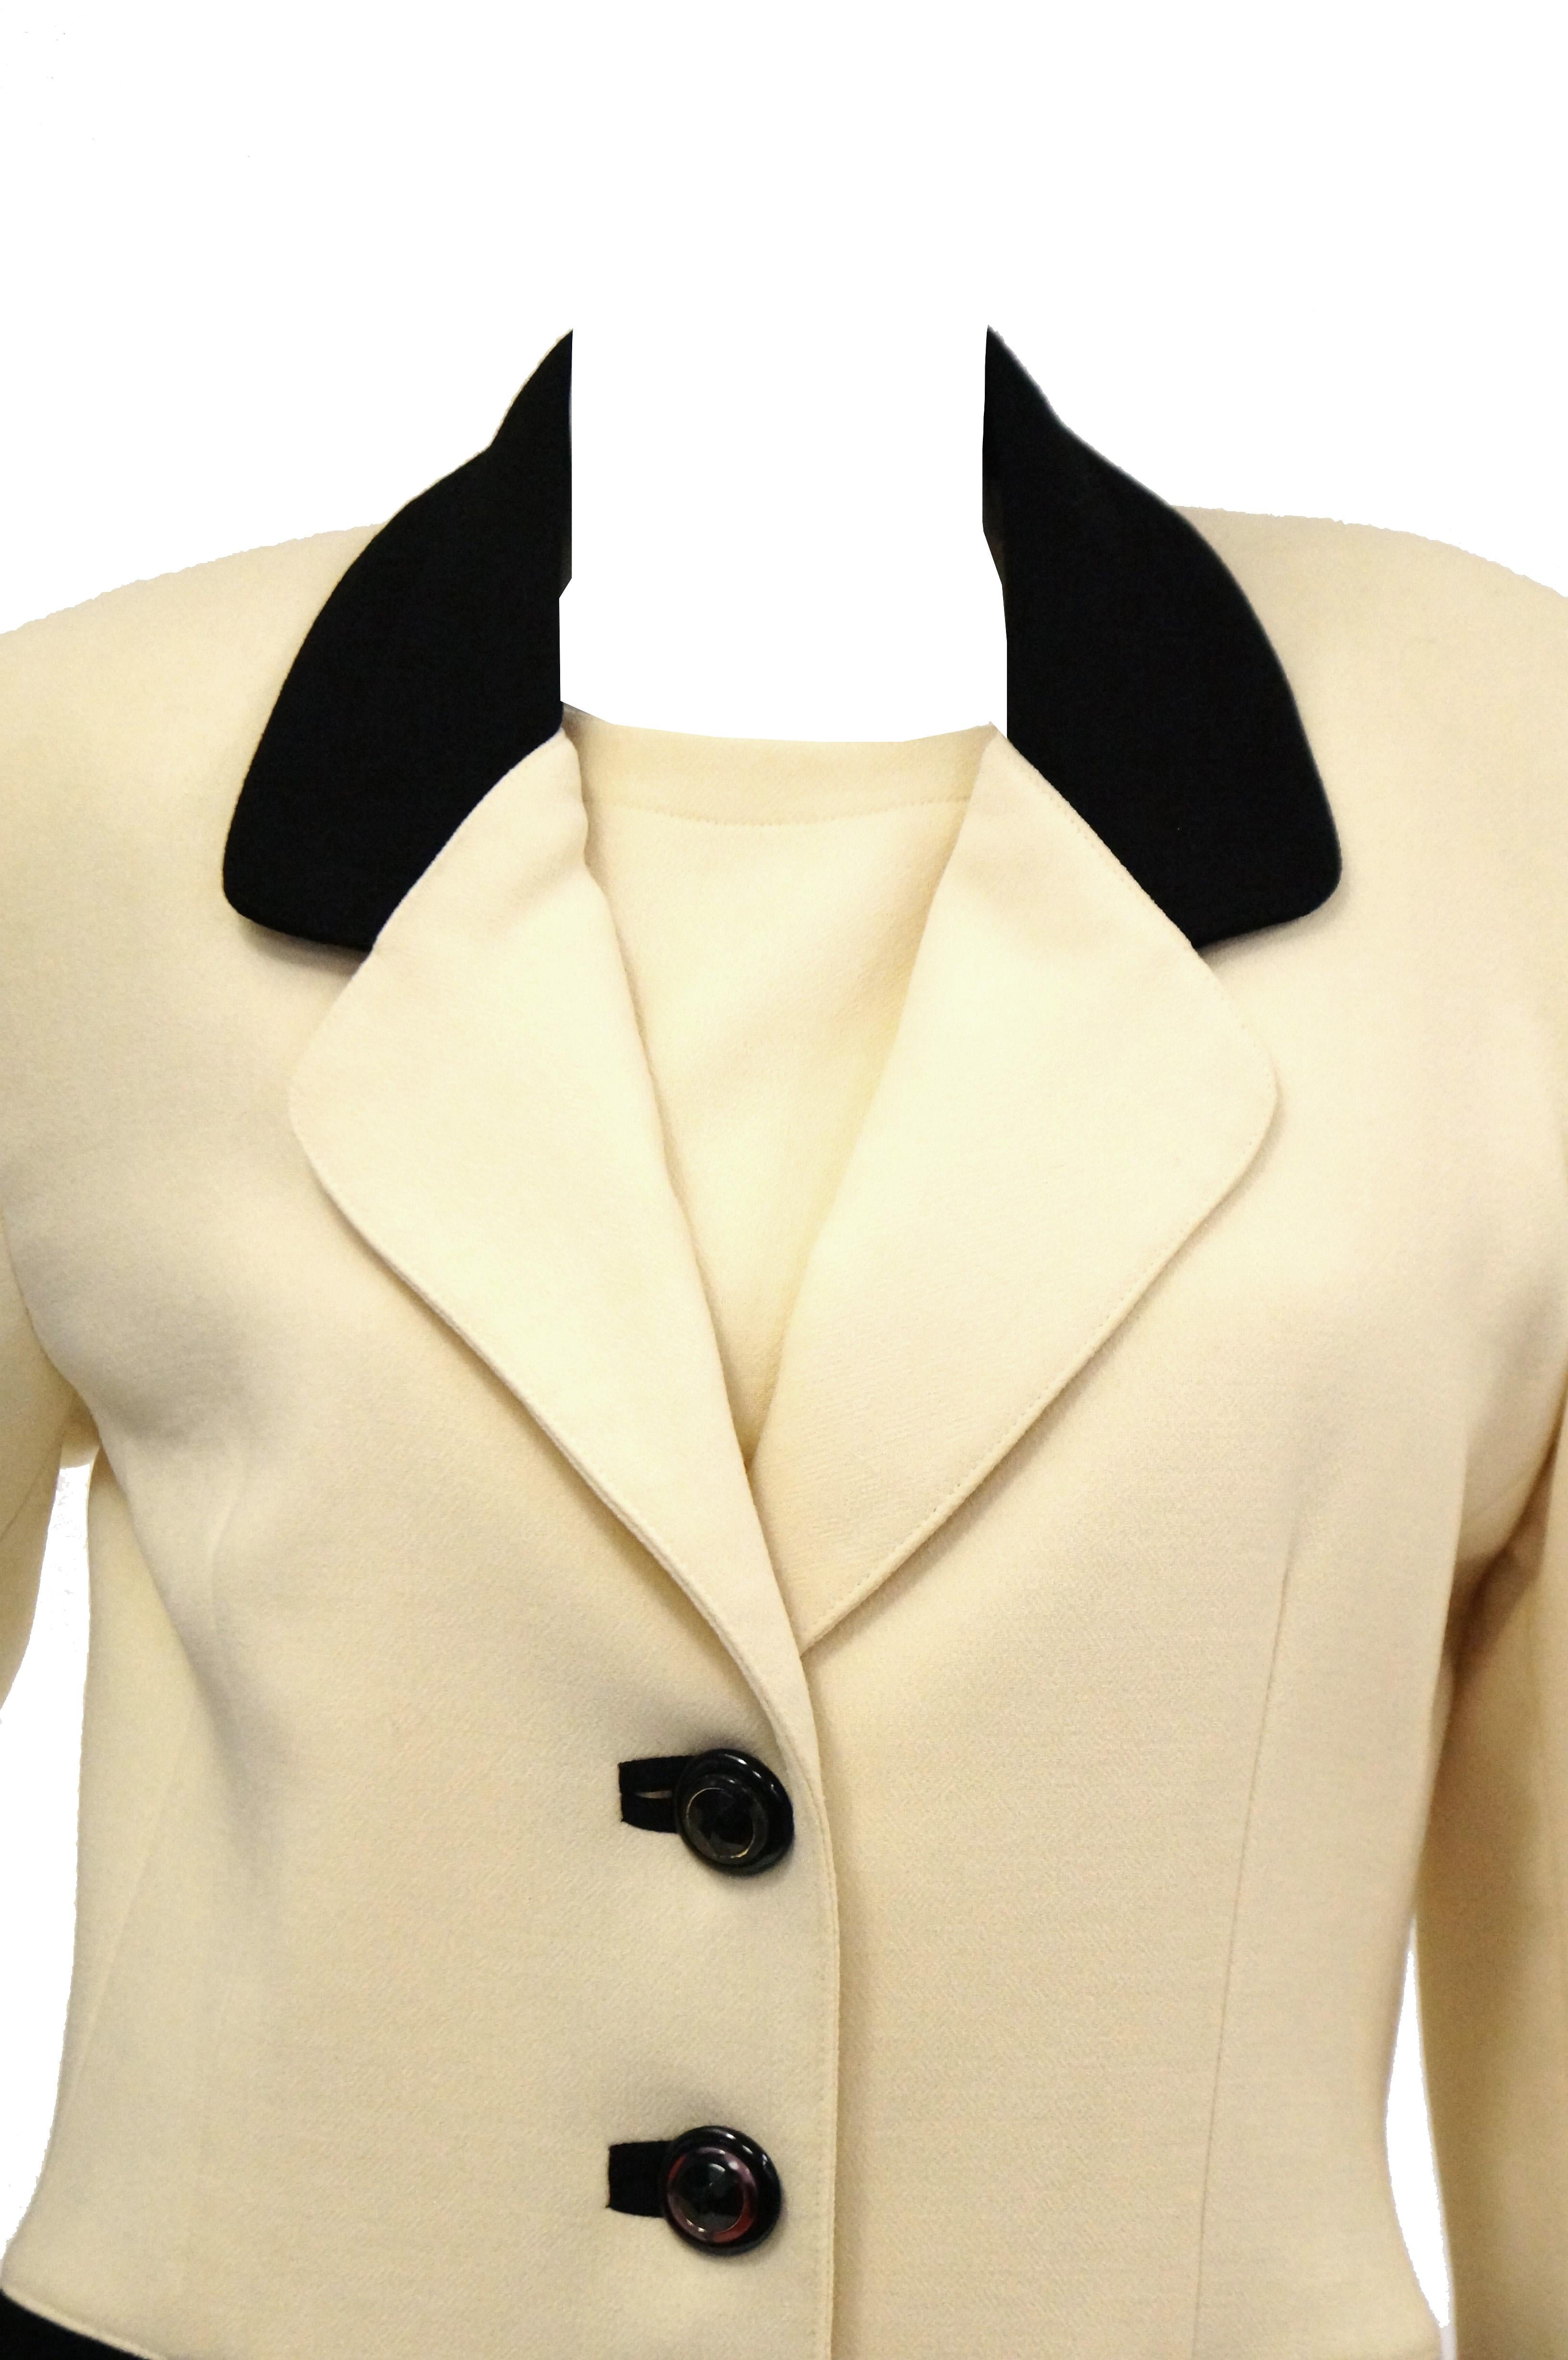 1980s Fontana Couture for Amen Wardy Cream and Black Scallop Suit Dress 5